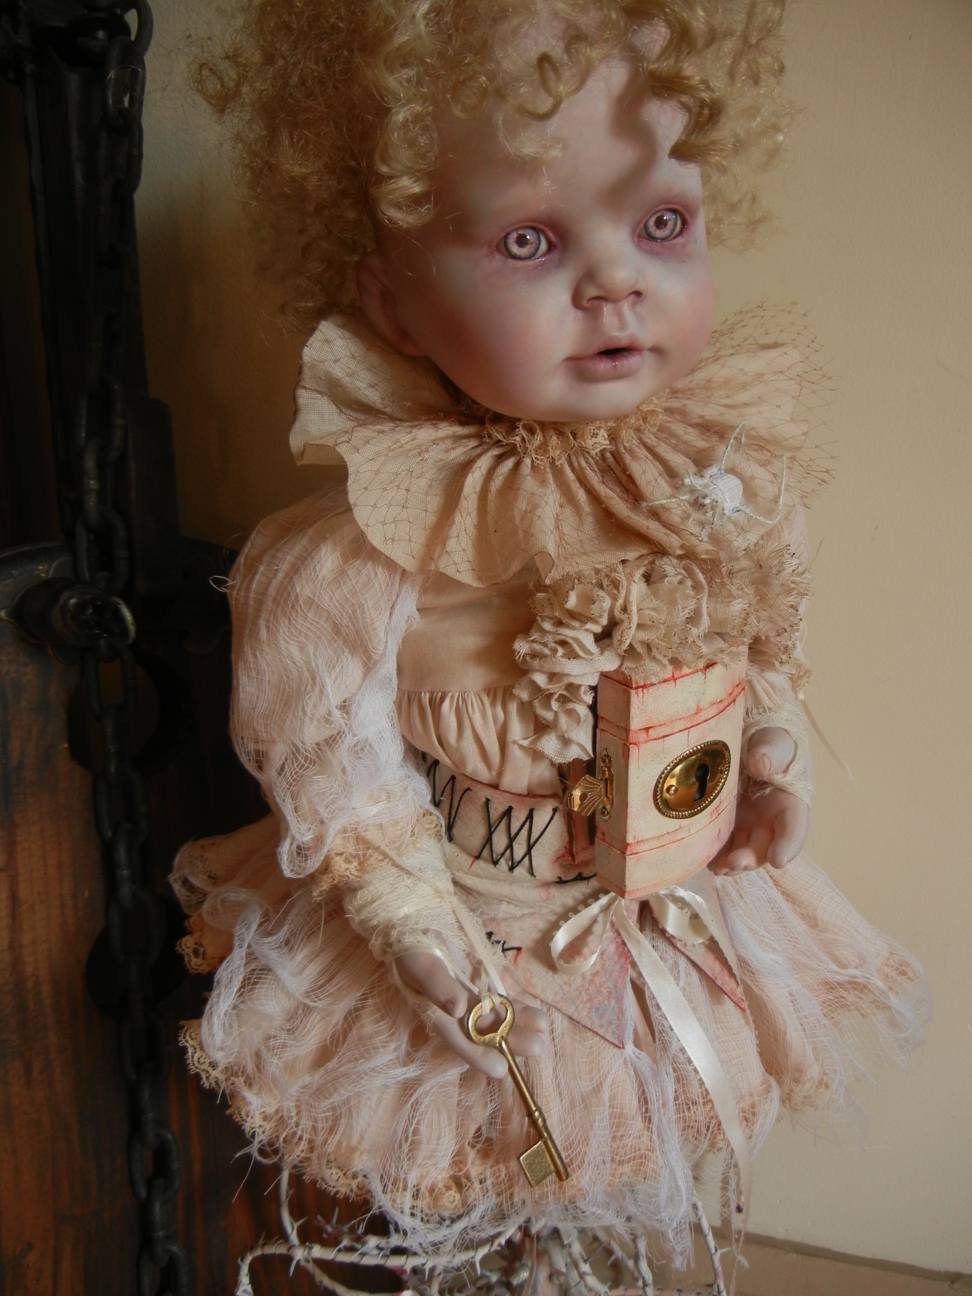 gothic fantasy artdoll mixed media porcelain doll body growing out of white thorny vine she has blond ringlets and pink eyes with a little locked cabinet in her torso